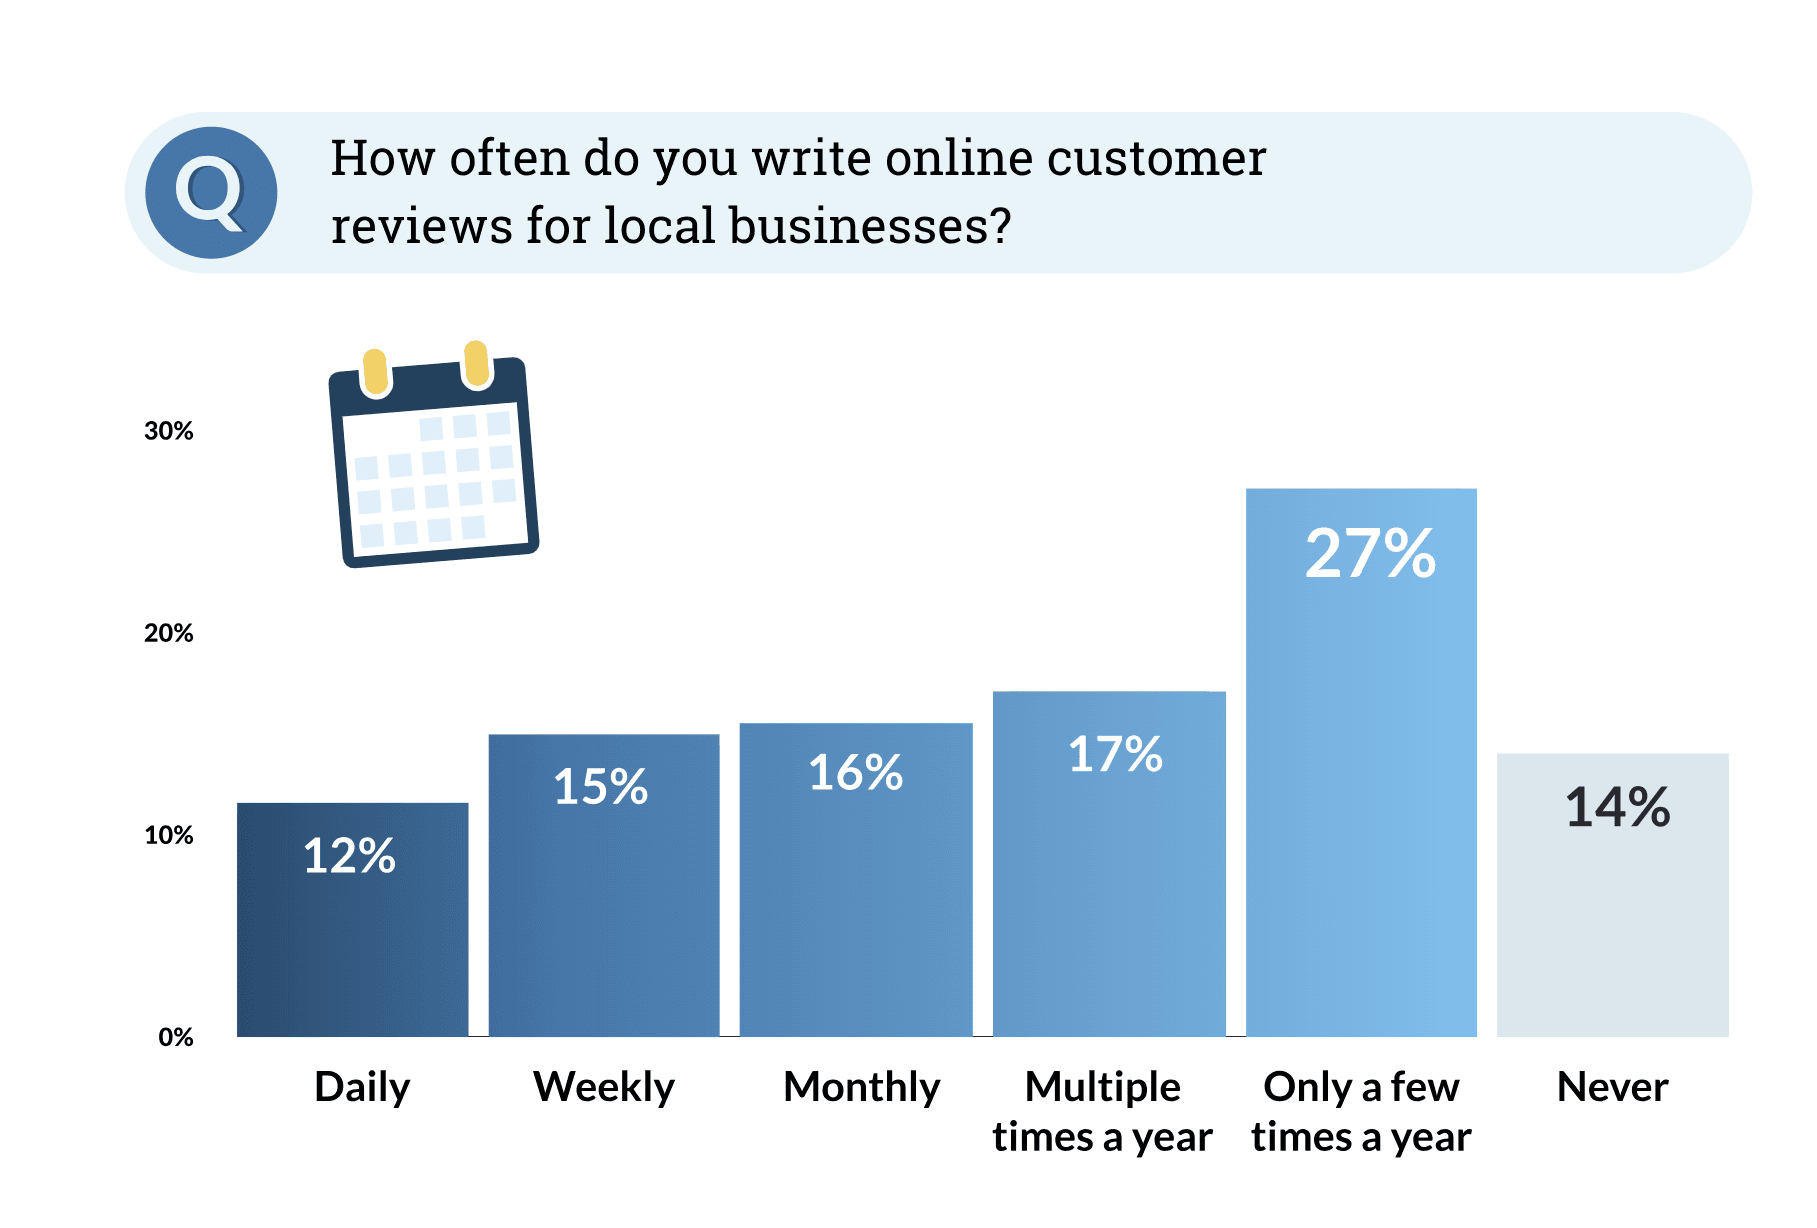 infographic showing that only 14% of US adults never write local business reviews